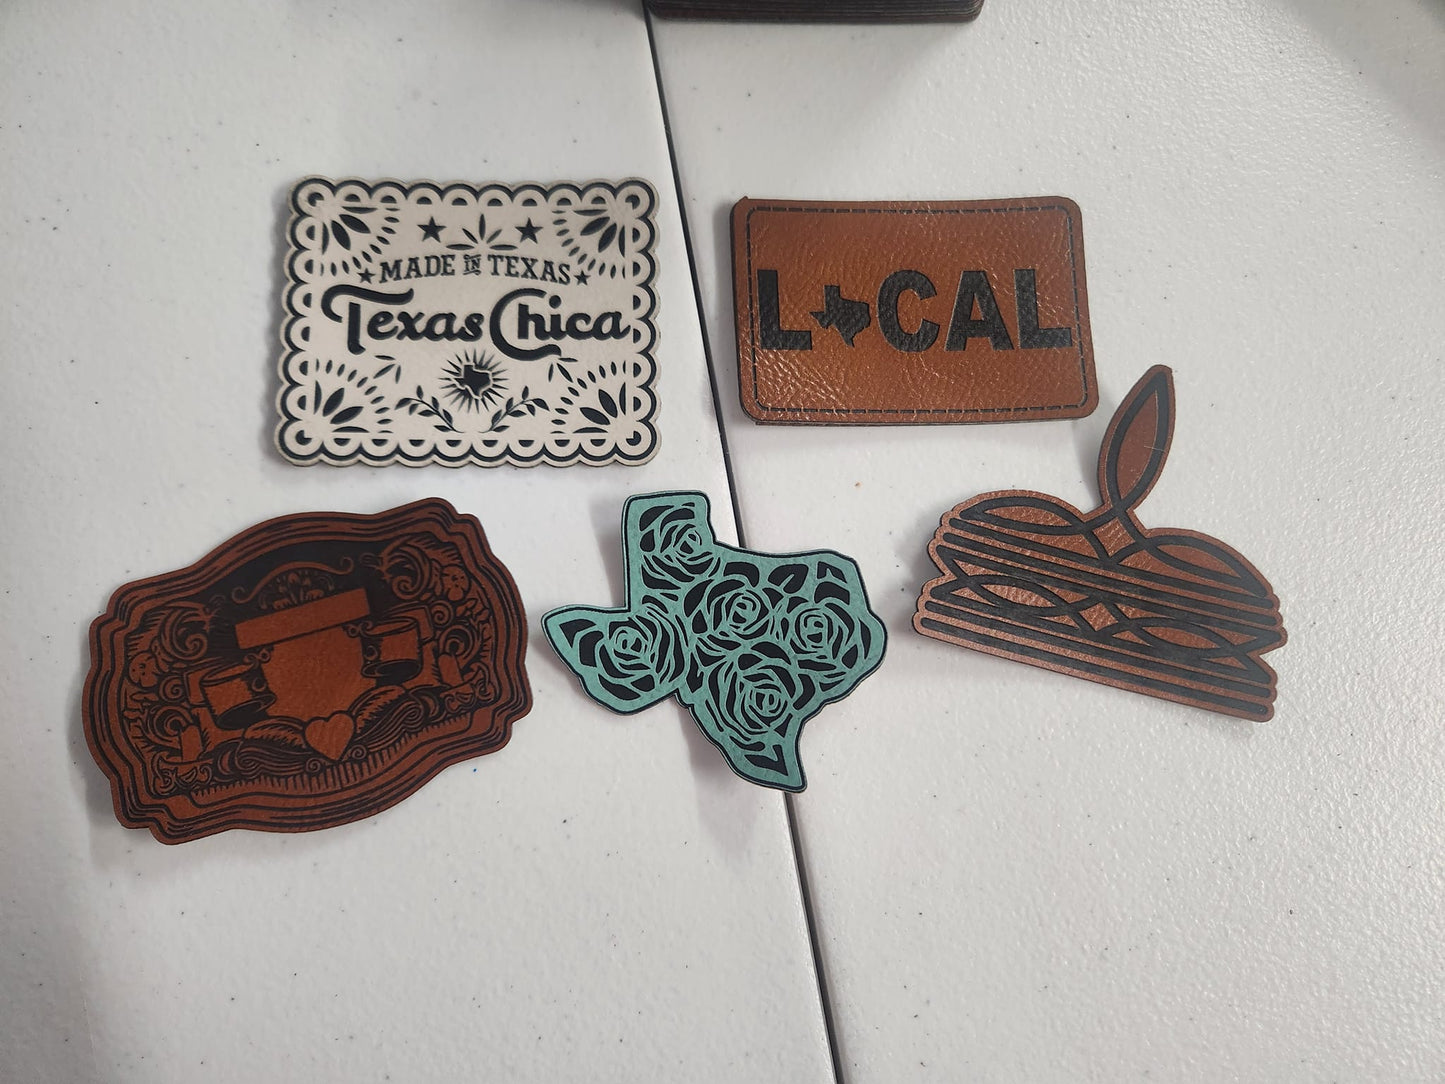 Local Texas LEATHER IRON-ON PATCH